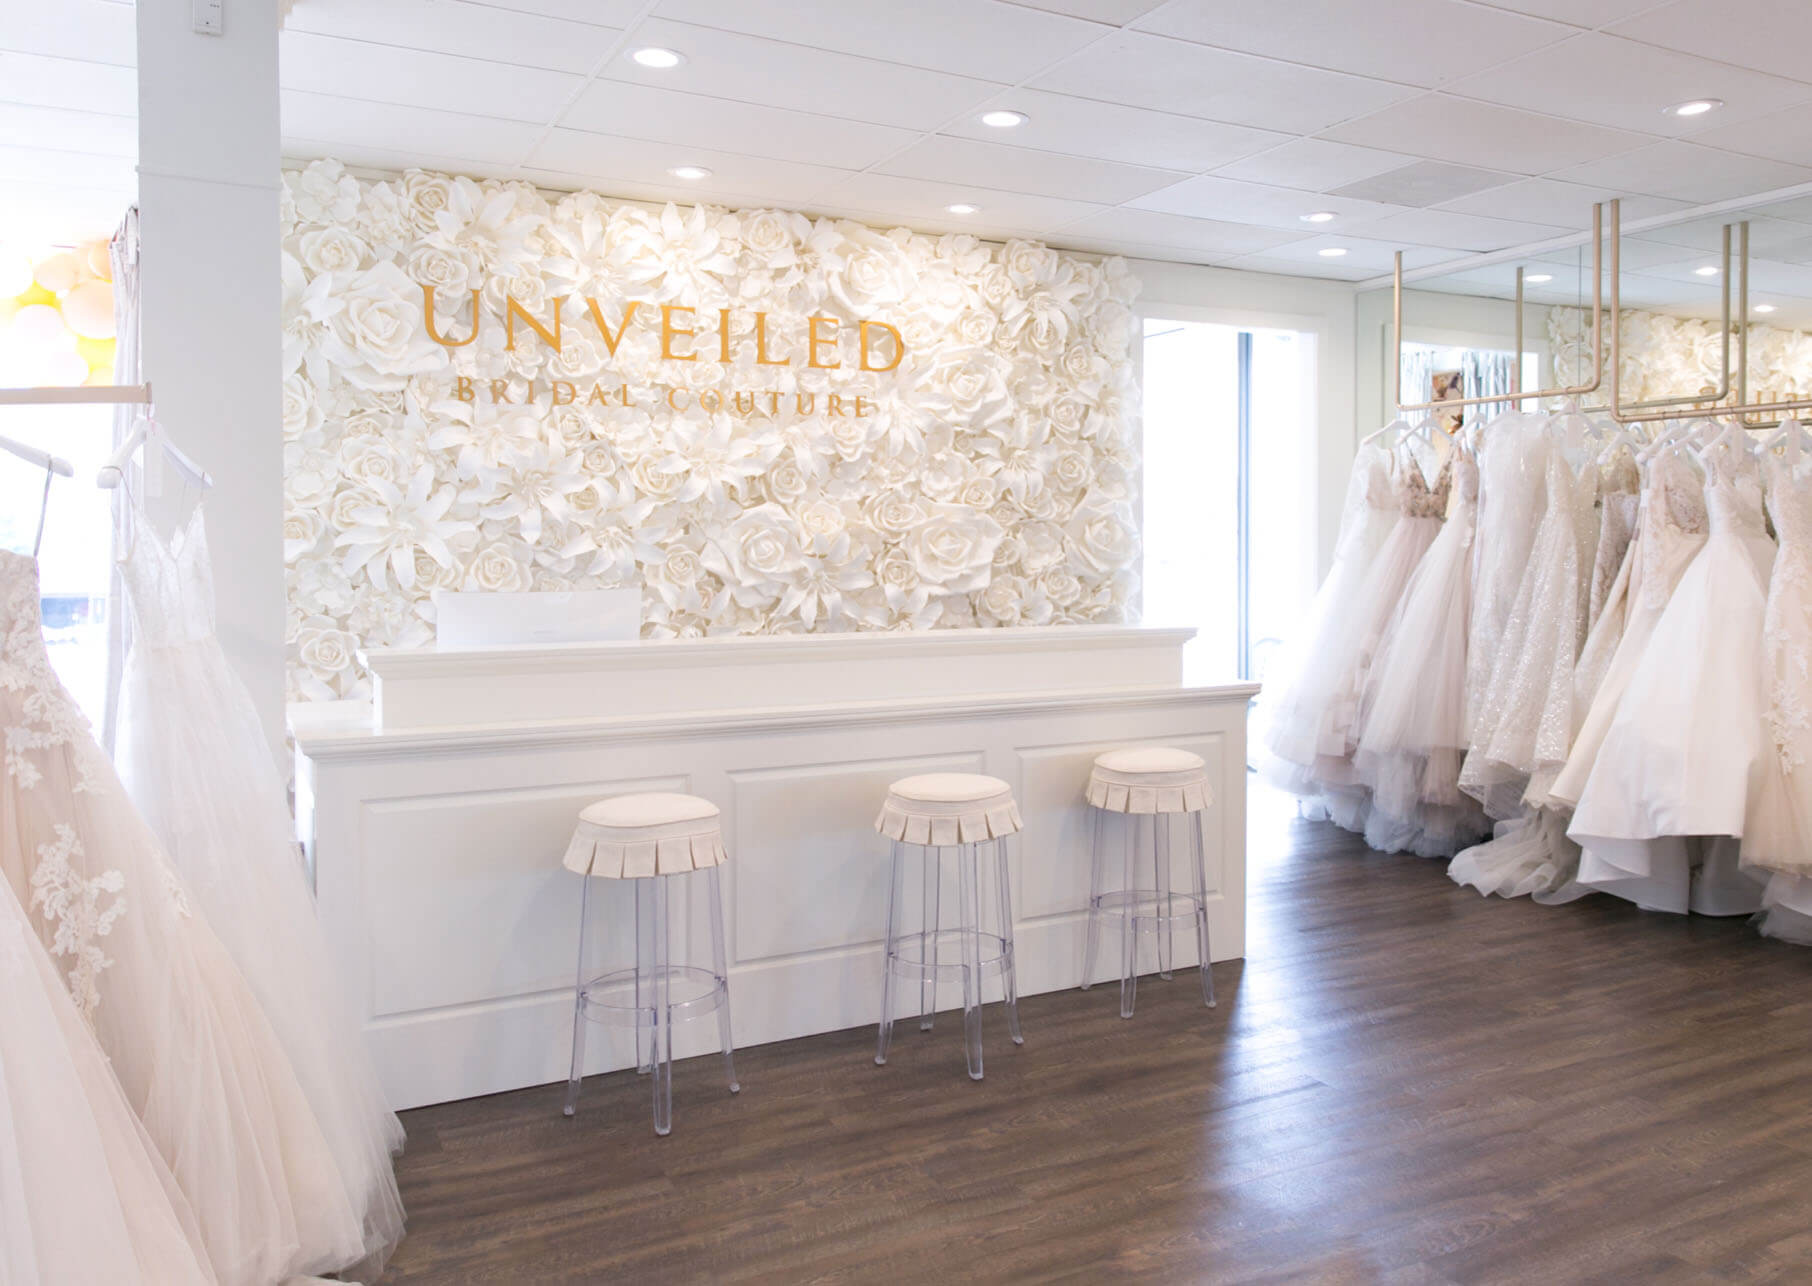 Photo of Unveiled Bridal Couture Showroom Interior